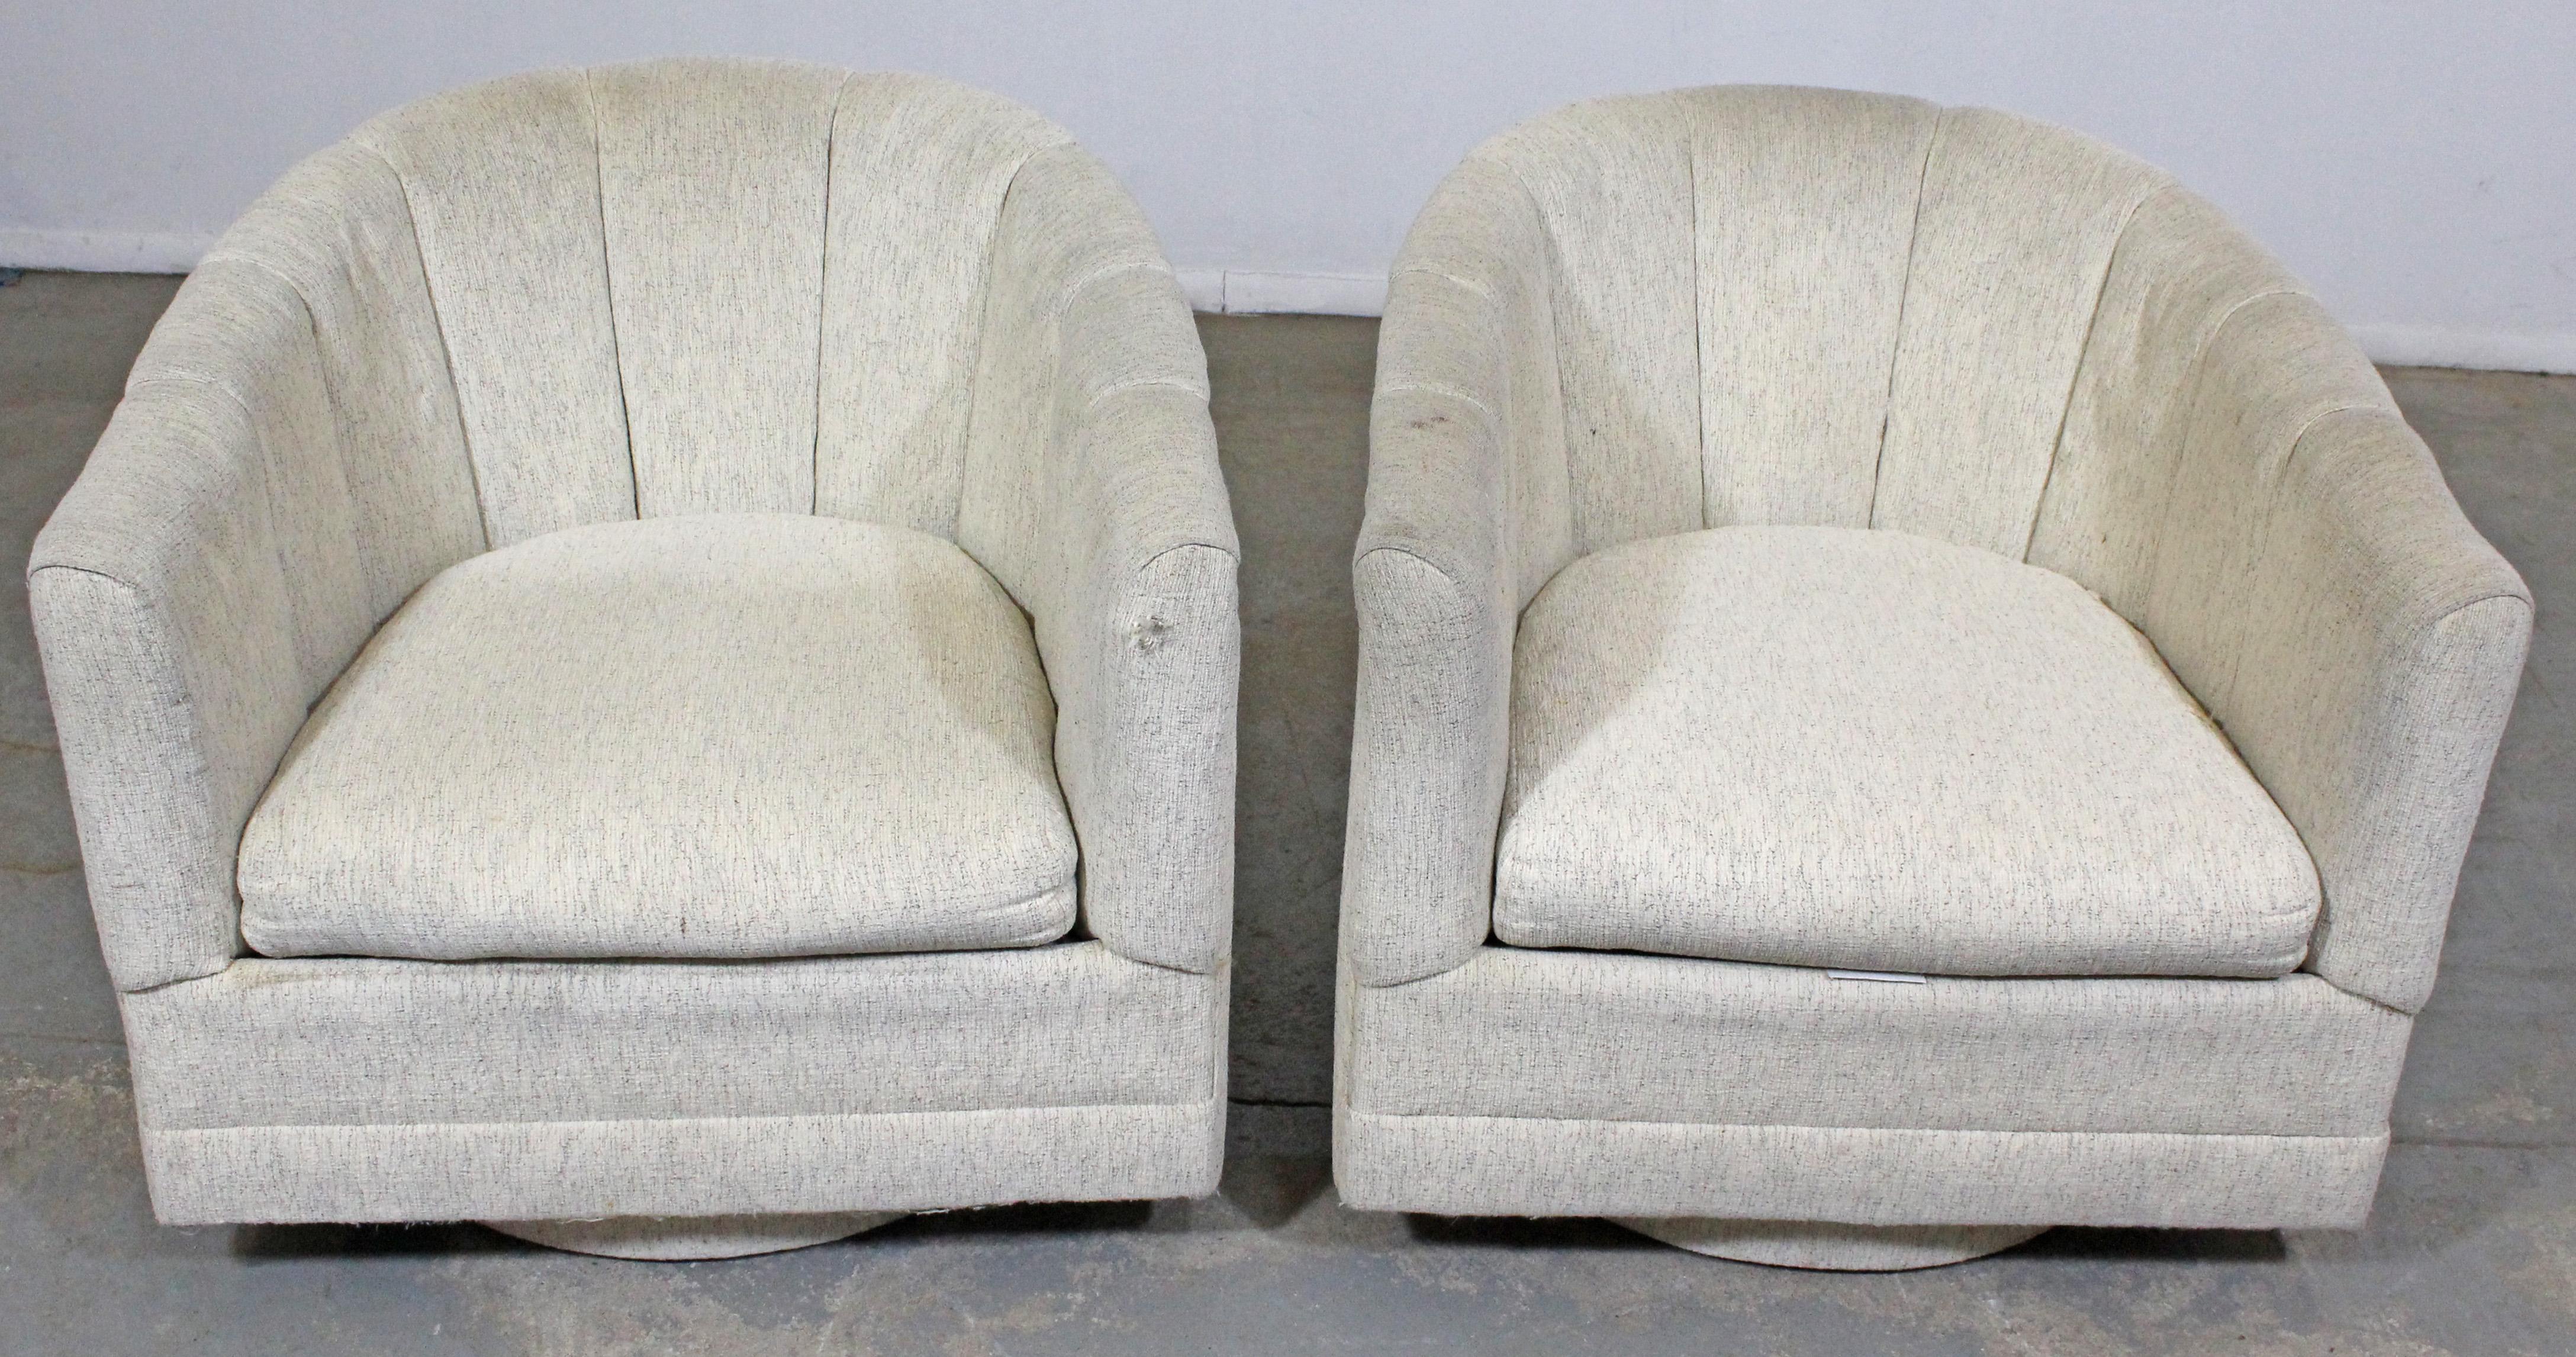 What a find. Offered is a pair of Mid-Century Modern swivel chairs by Precedent, circa 1970s. They are in fair vintage condition (tears, stains, age wear). Need to be reupholstered, make a great template for restoration. They are signed by